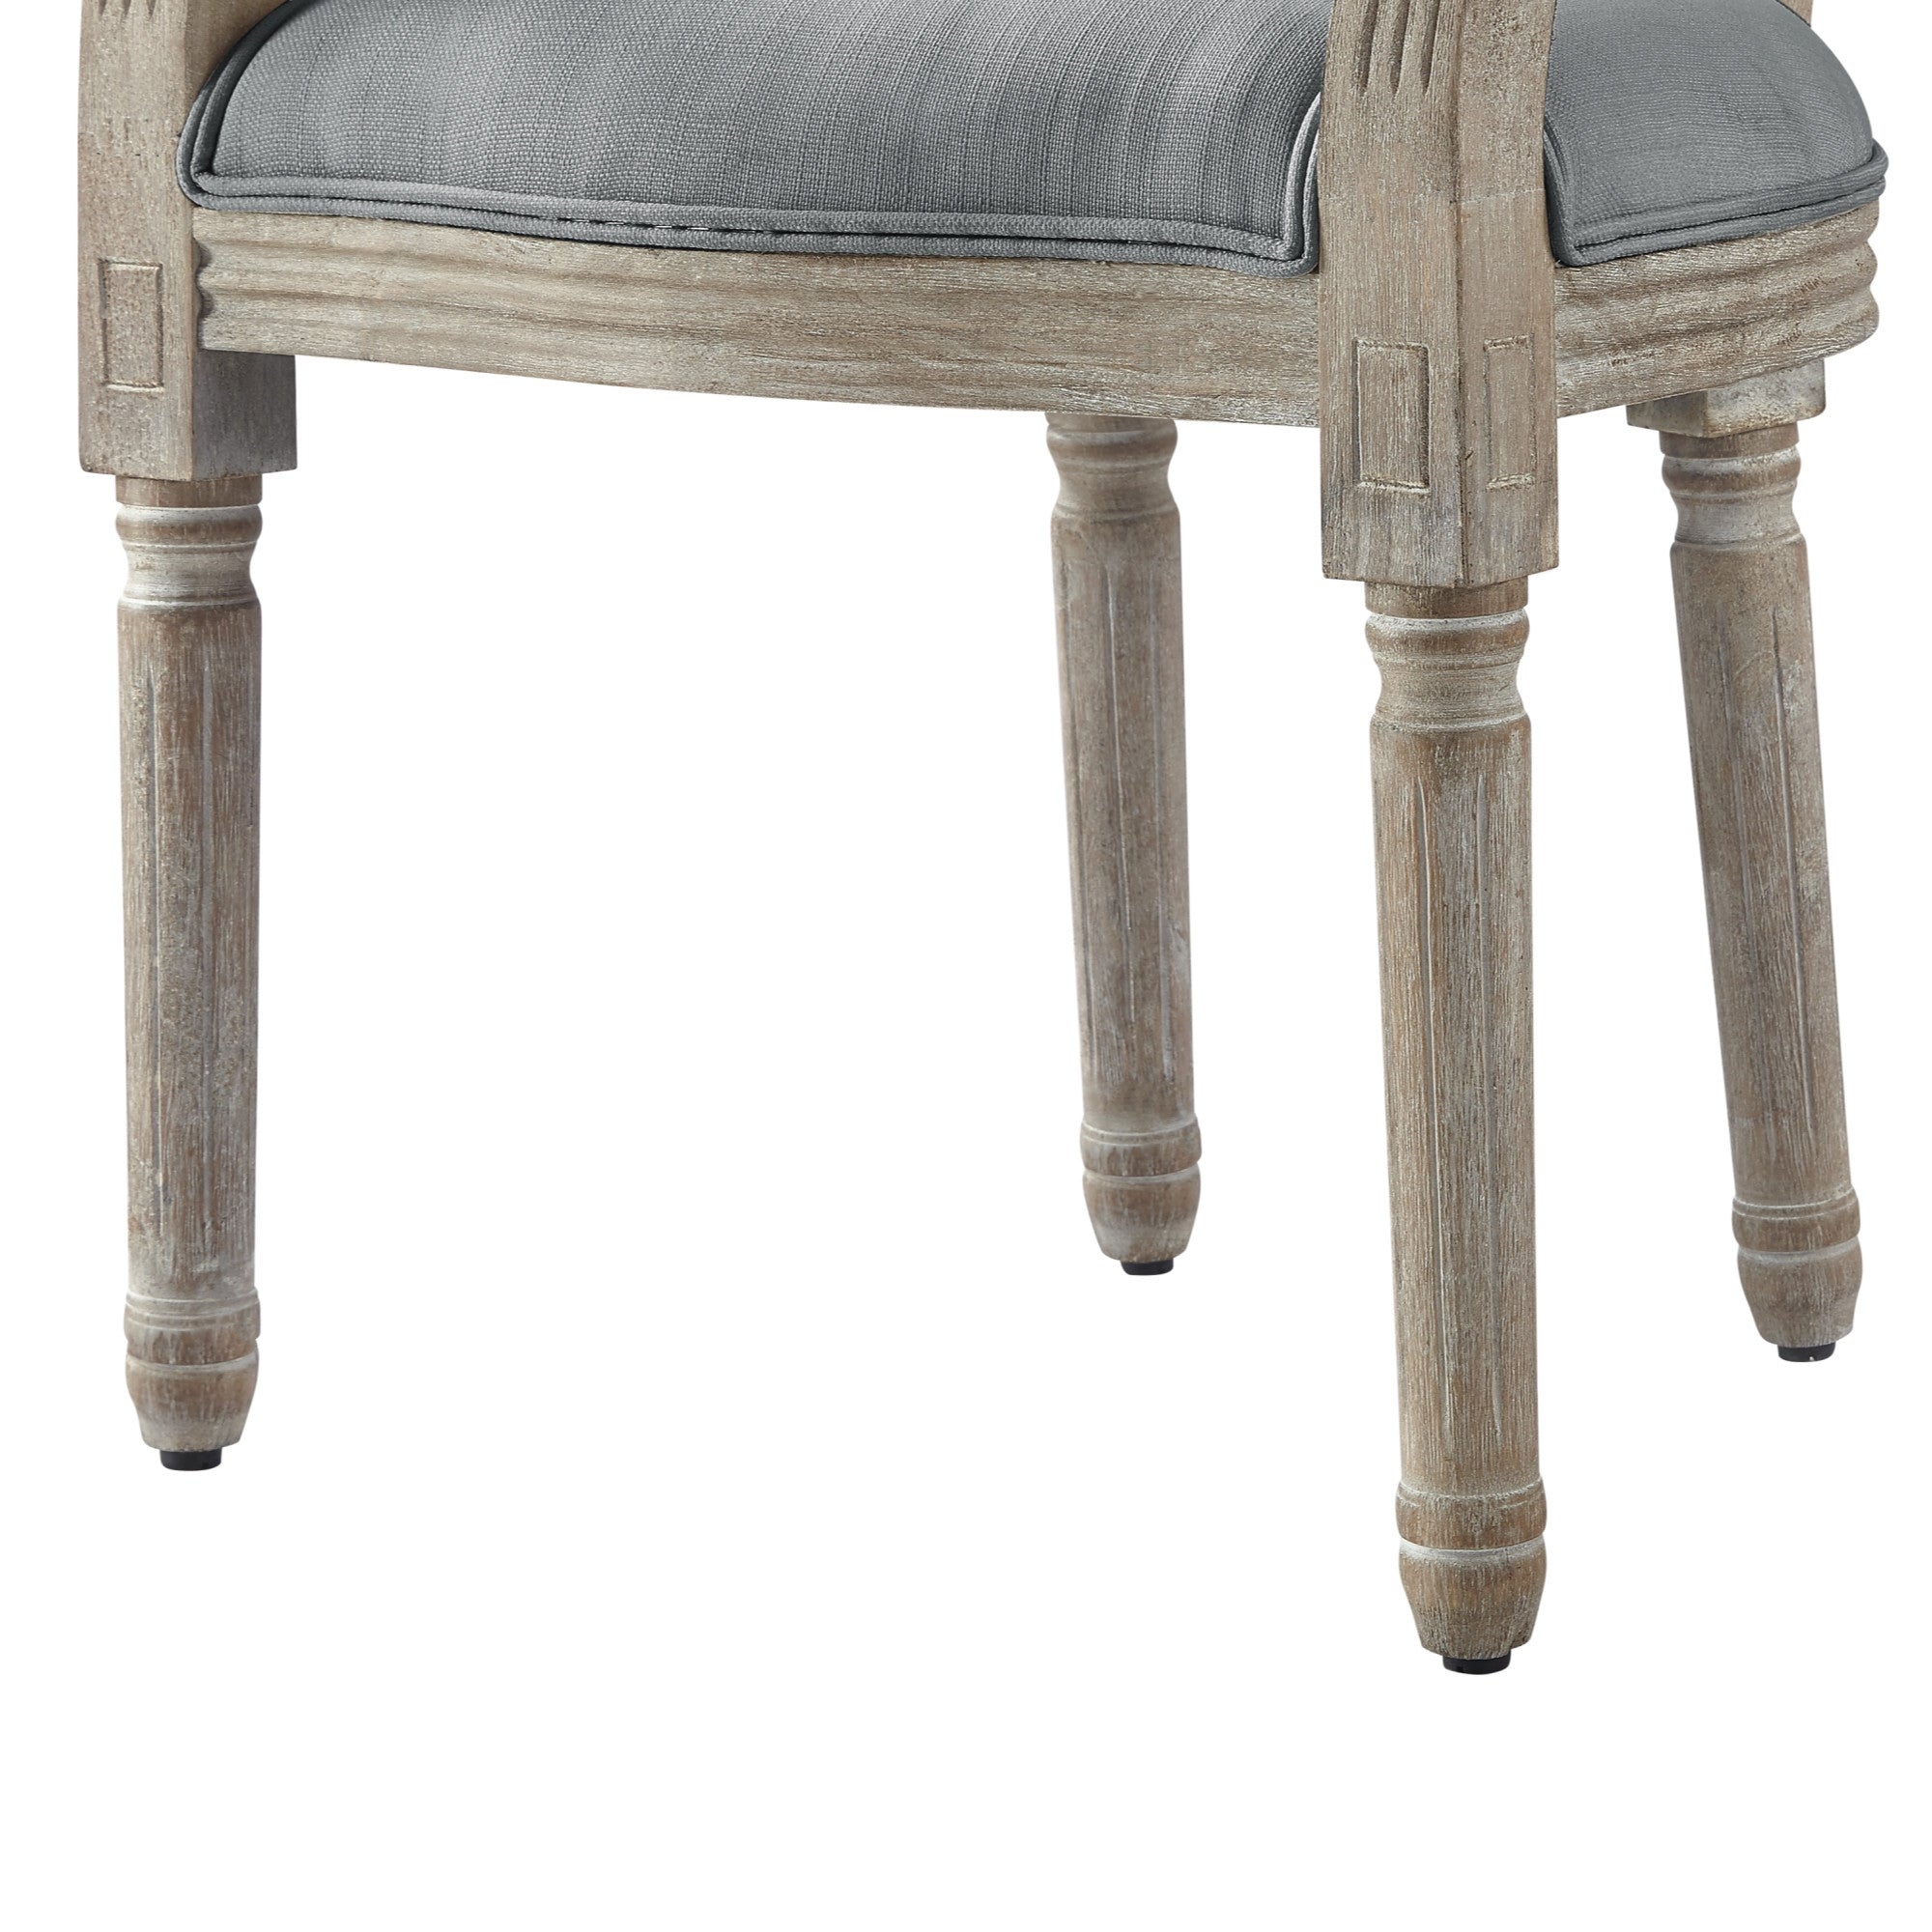 Tufted Beige and Brown Upholstered Linen Dining Arm Chair